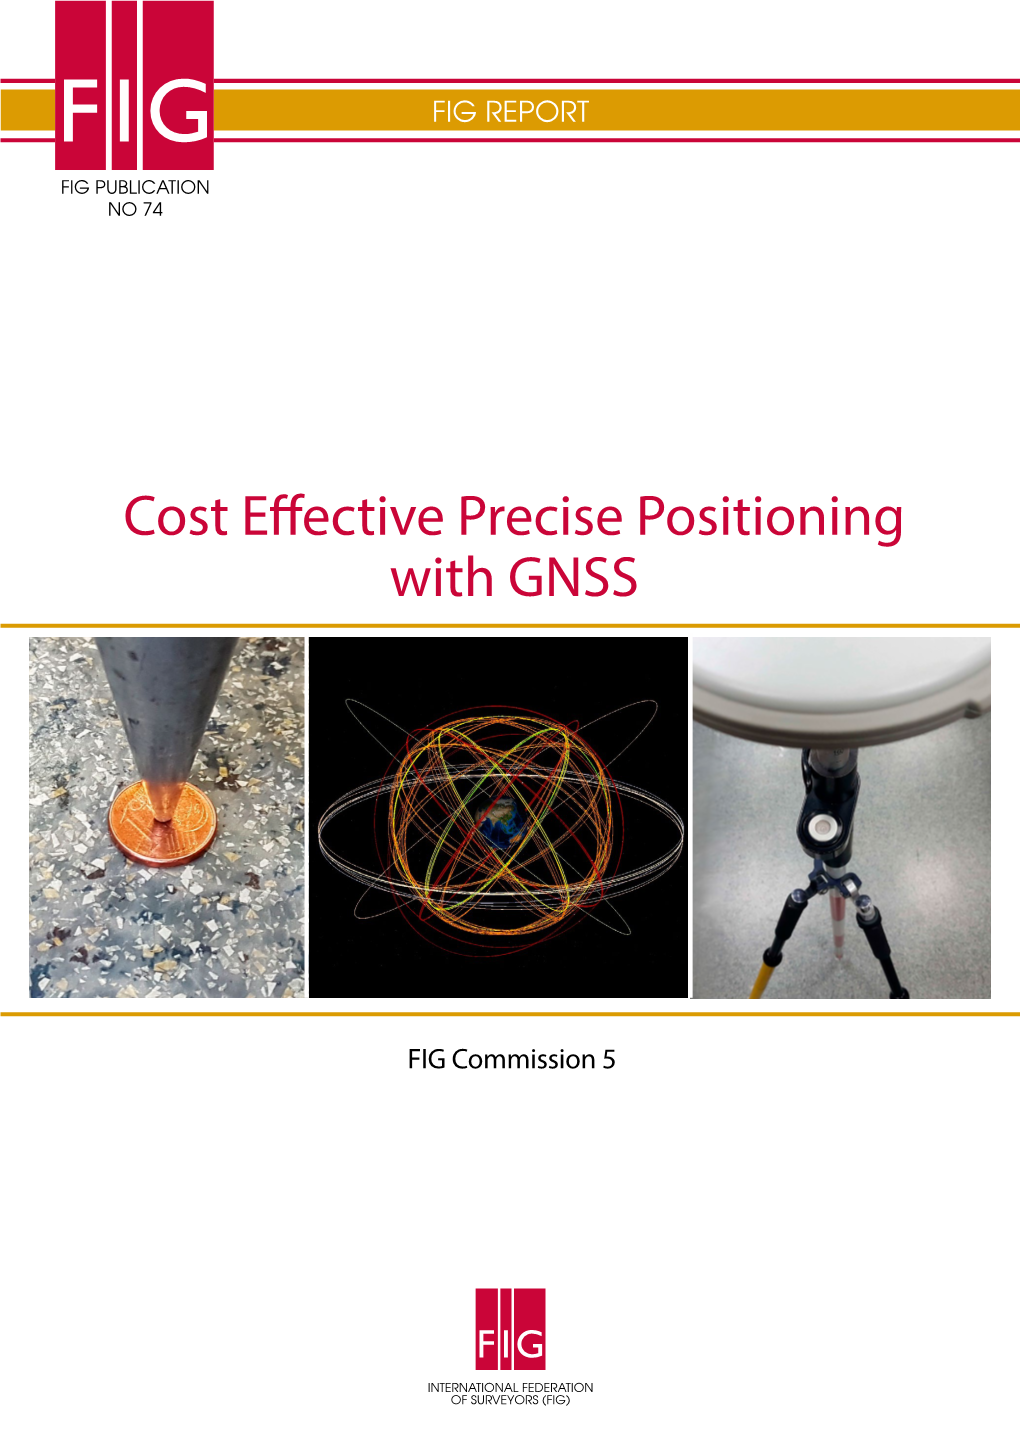 Cost Effective Precise Positioning with GNSS